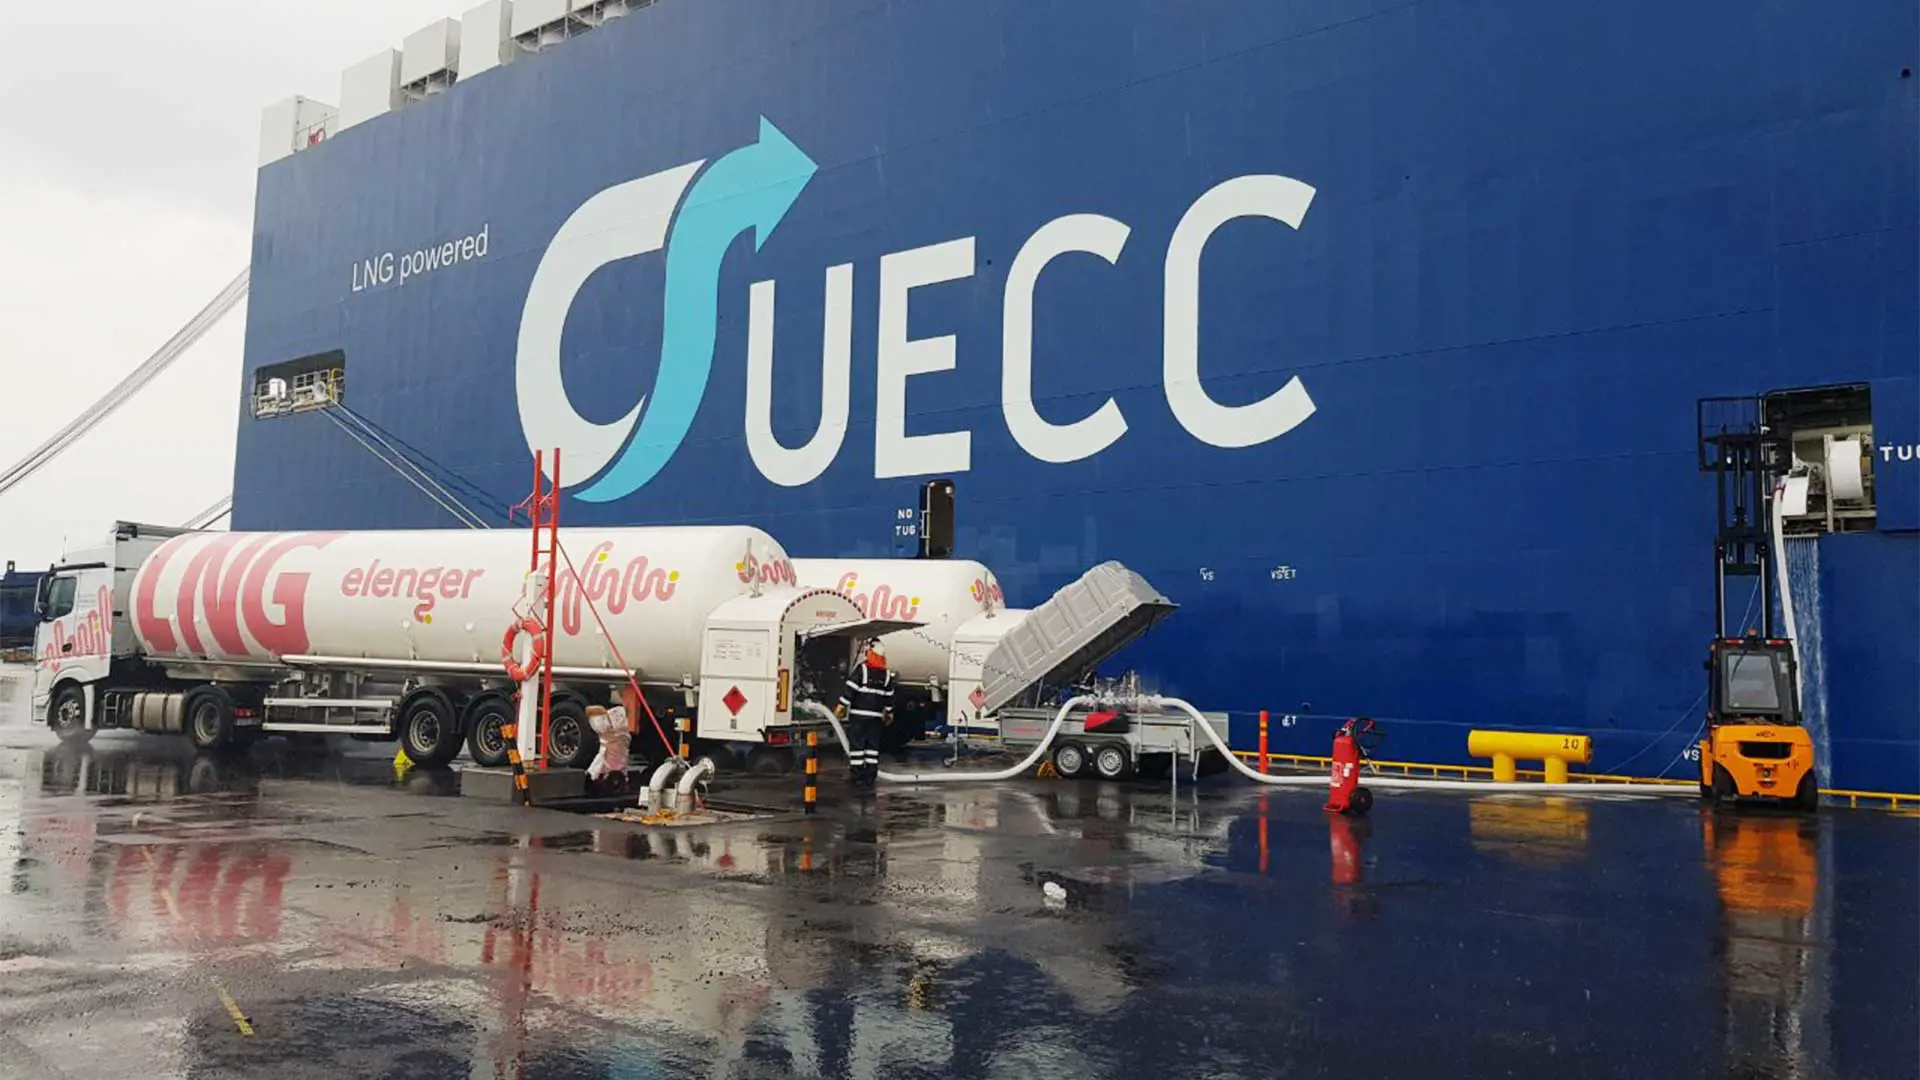 Two trucks transferring LNG to a ship simultaneously with the Y-piece